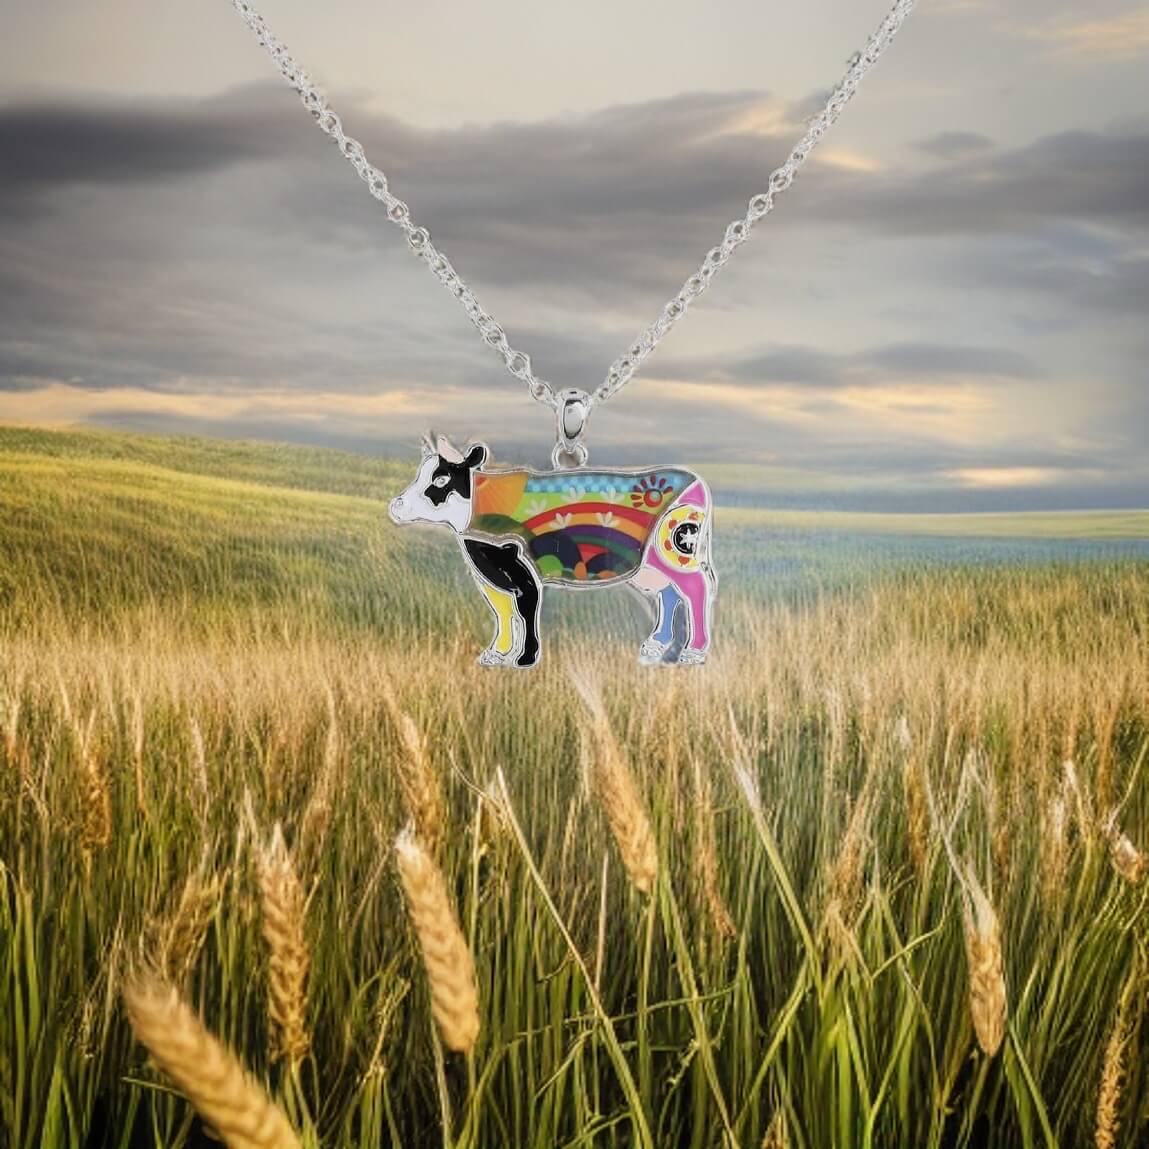 Multi coloured enamel cow necklace with 24" adjustable chain.